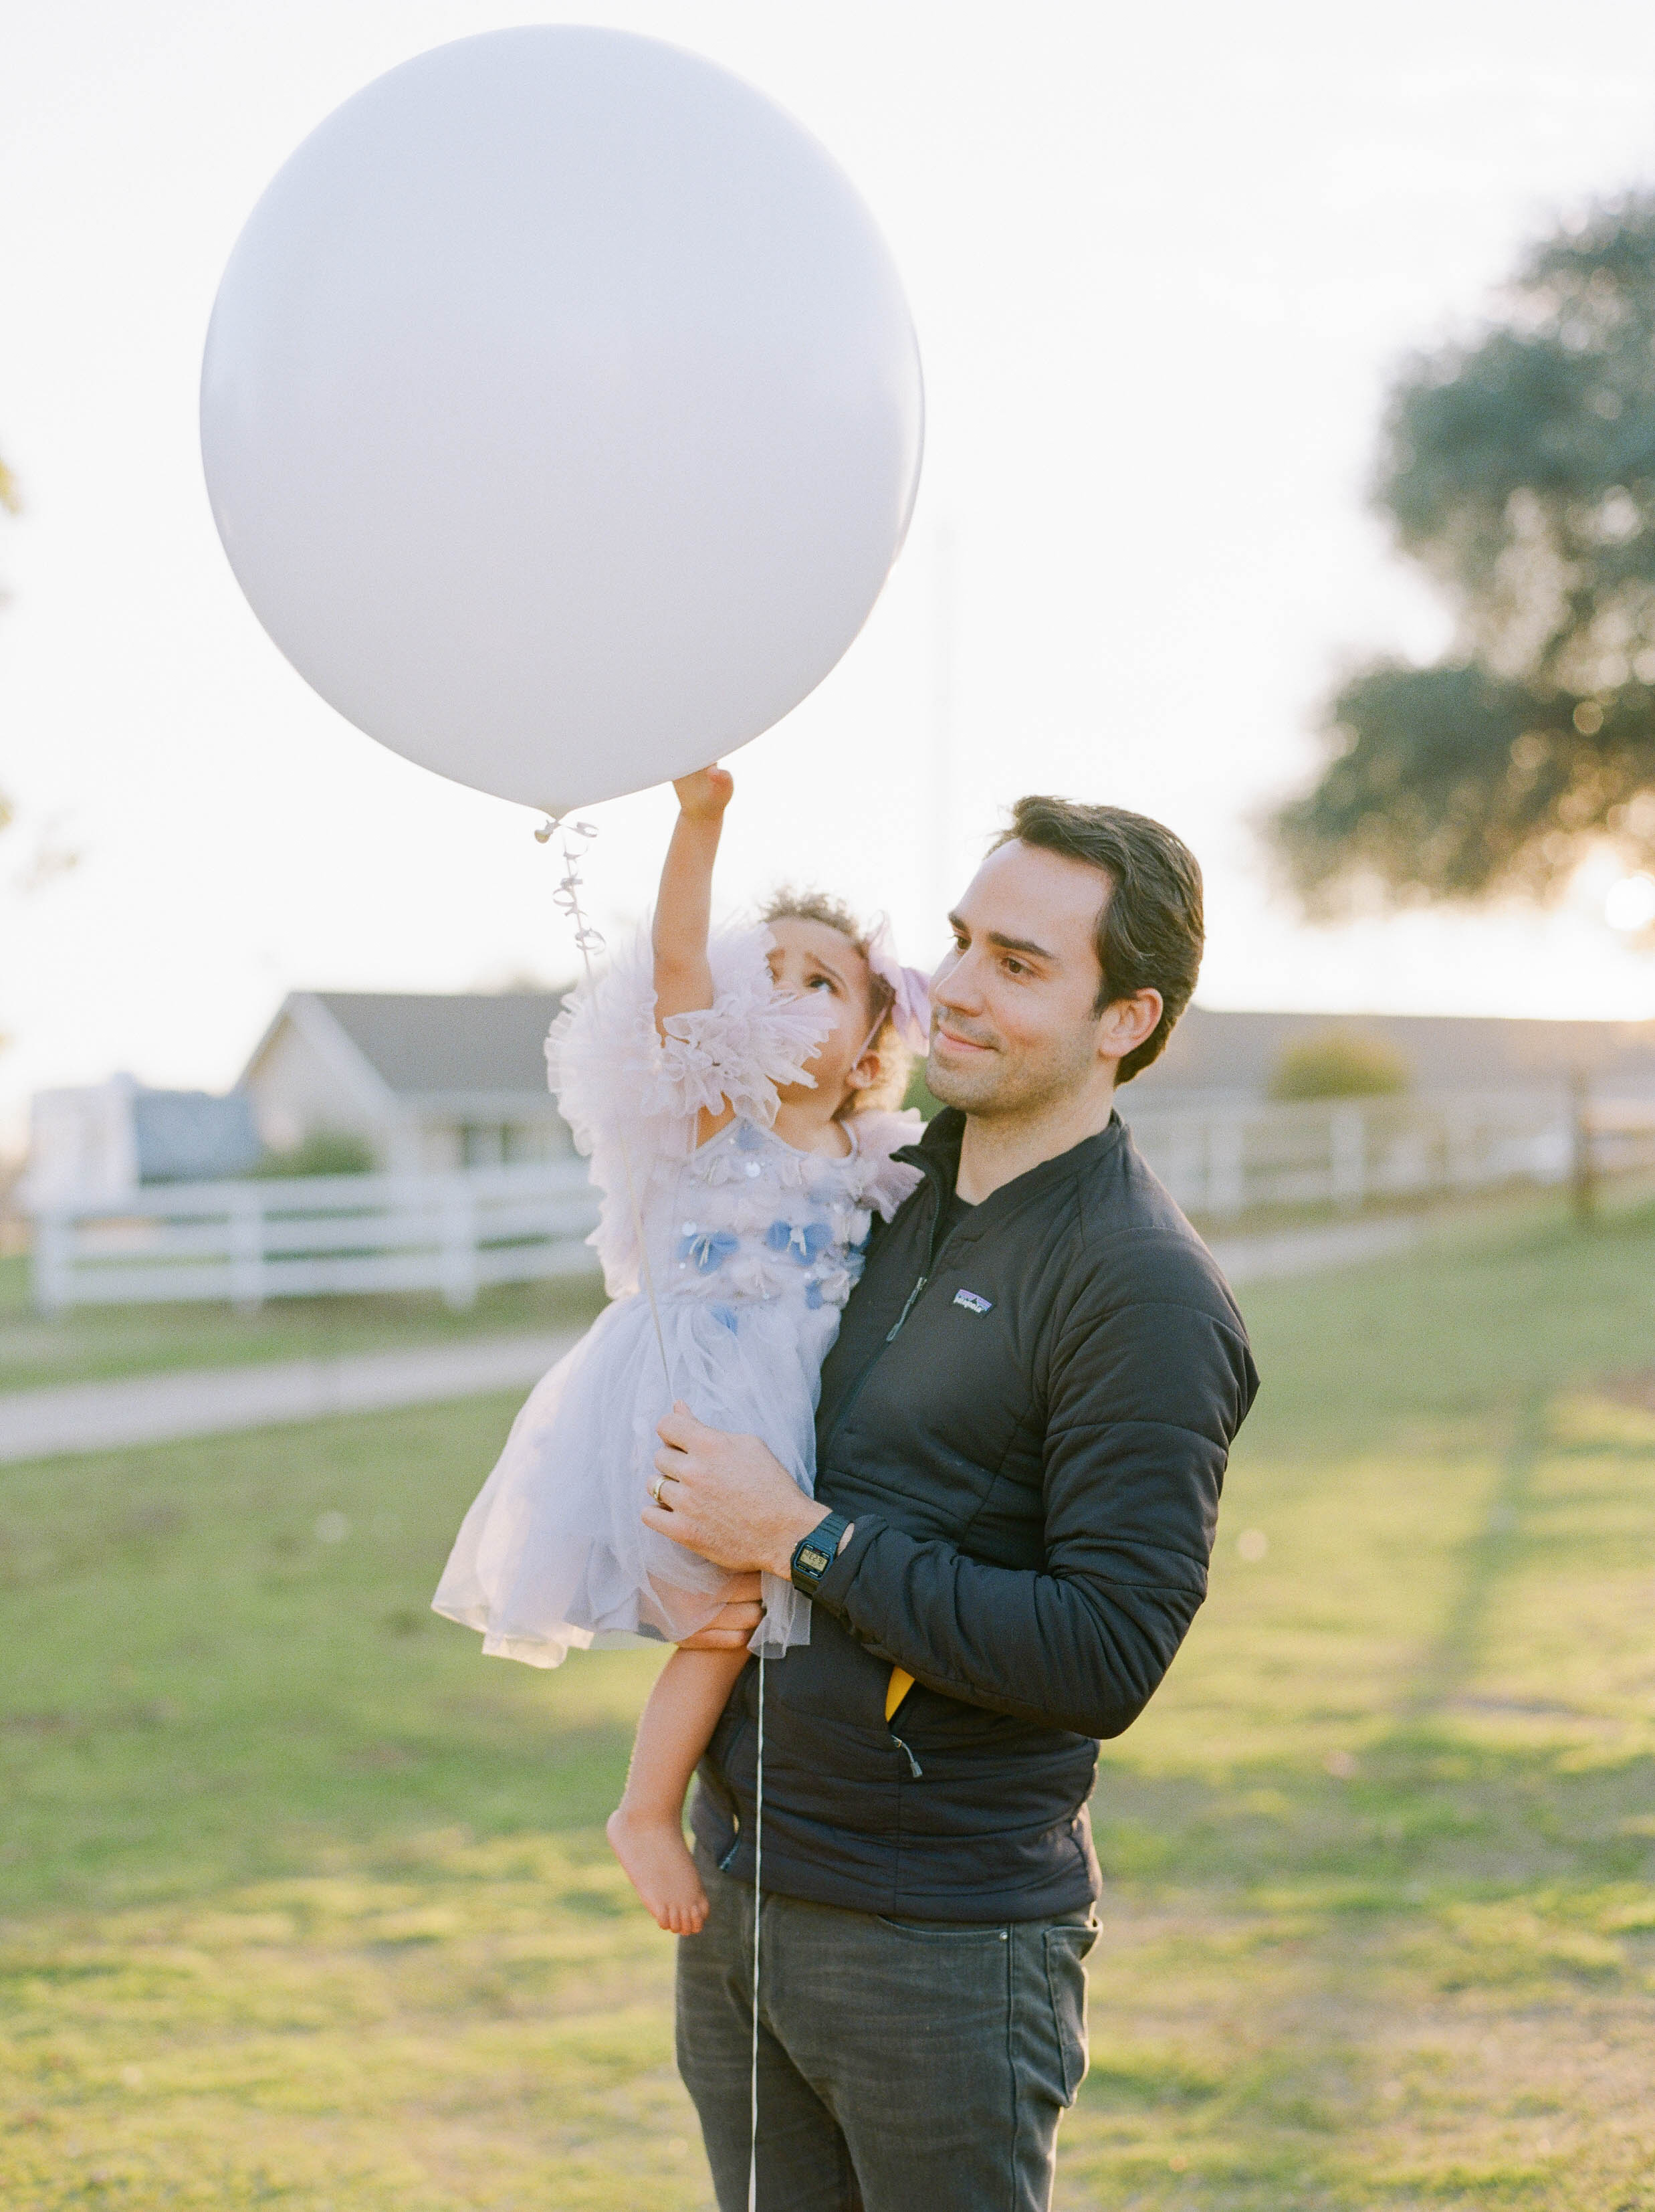 Dreamy second birthday with animals in northern California